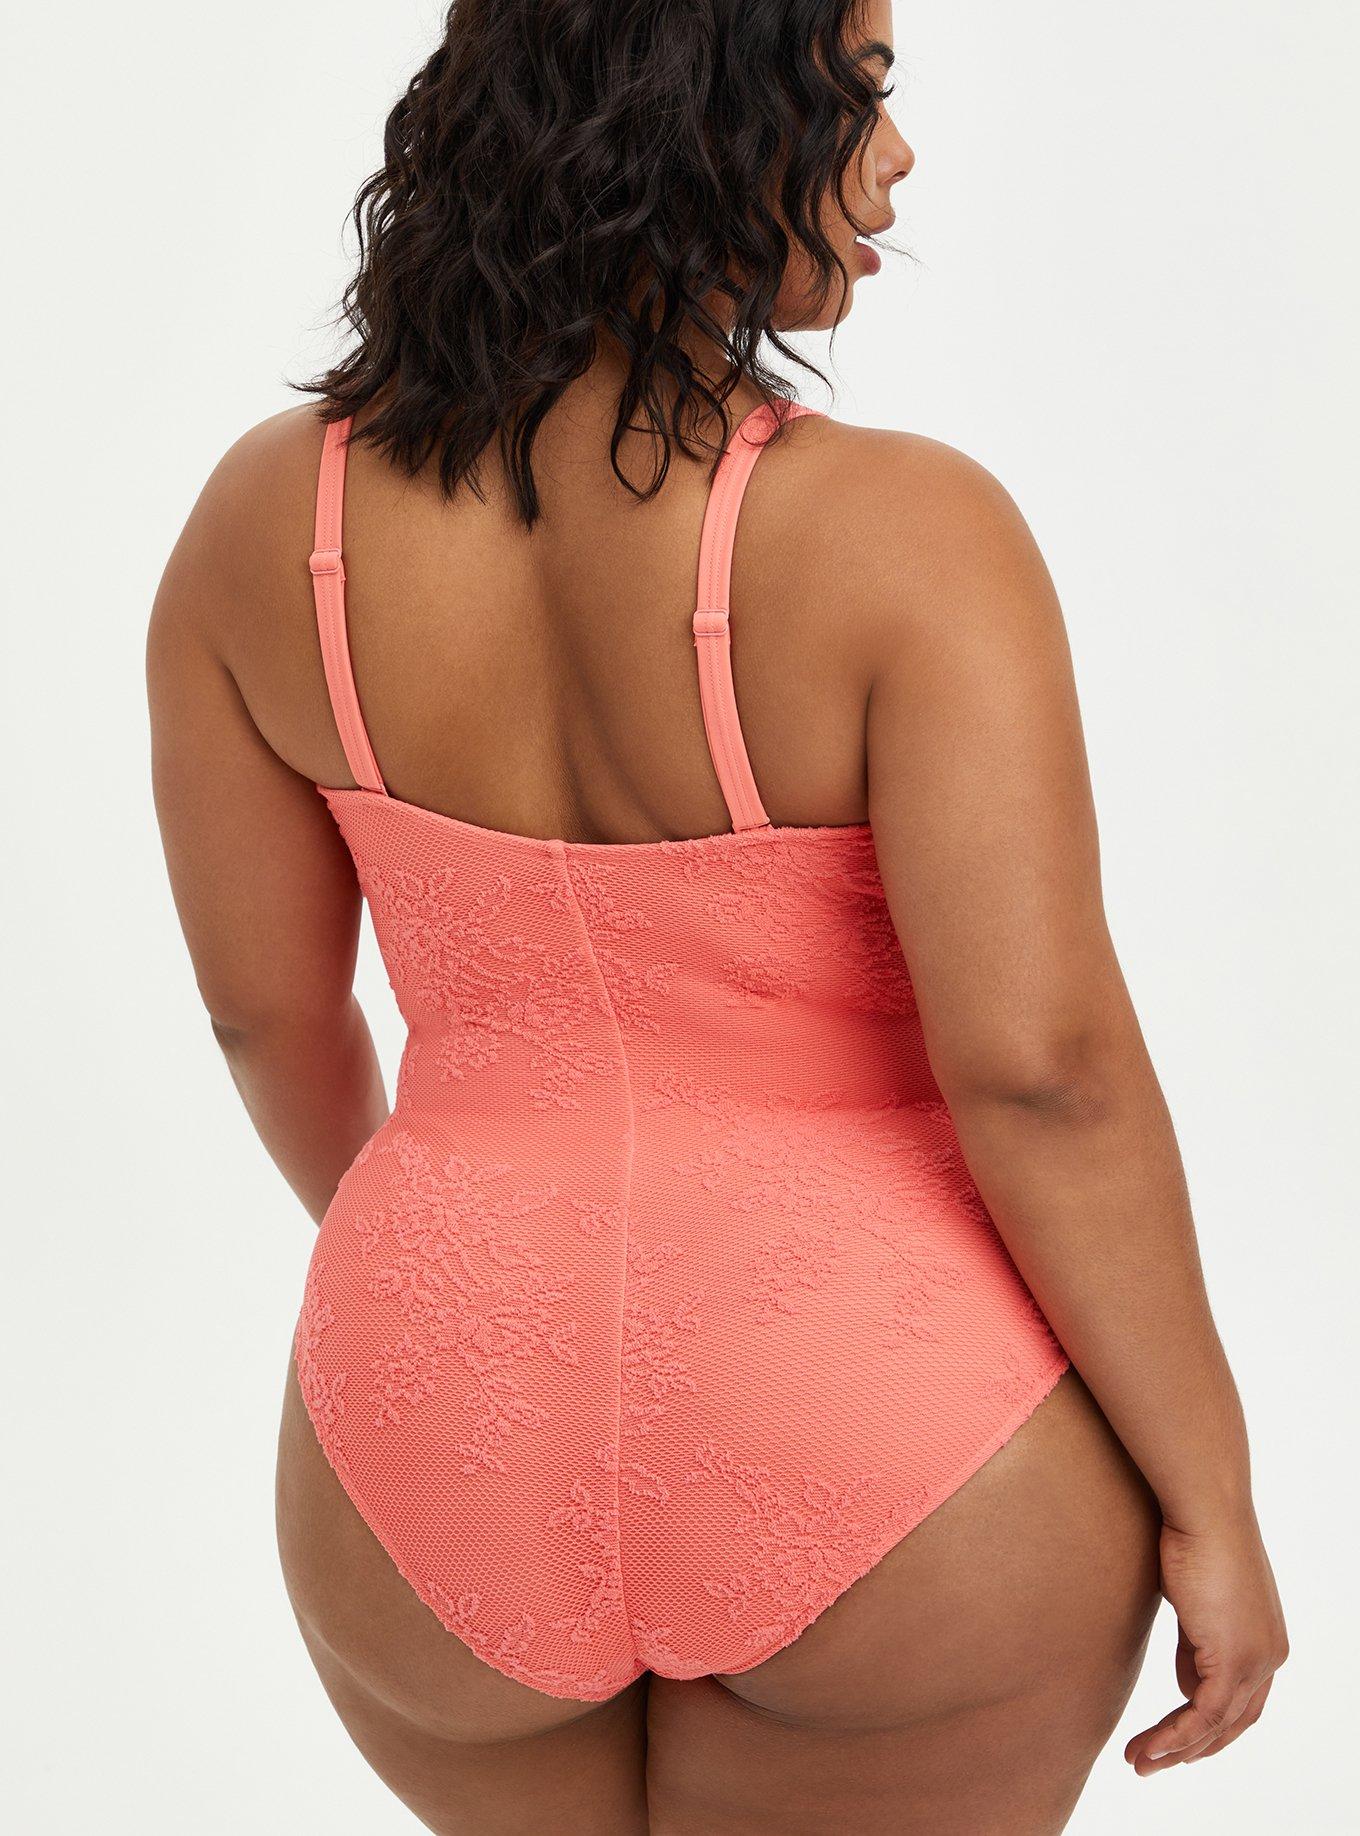 Swimsuits For All Women's Plus Size Temptress One Piece Swimsuit 18 Coral